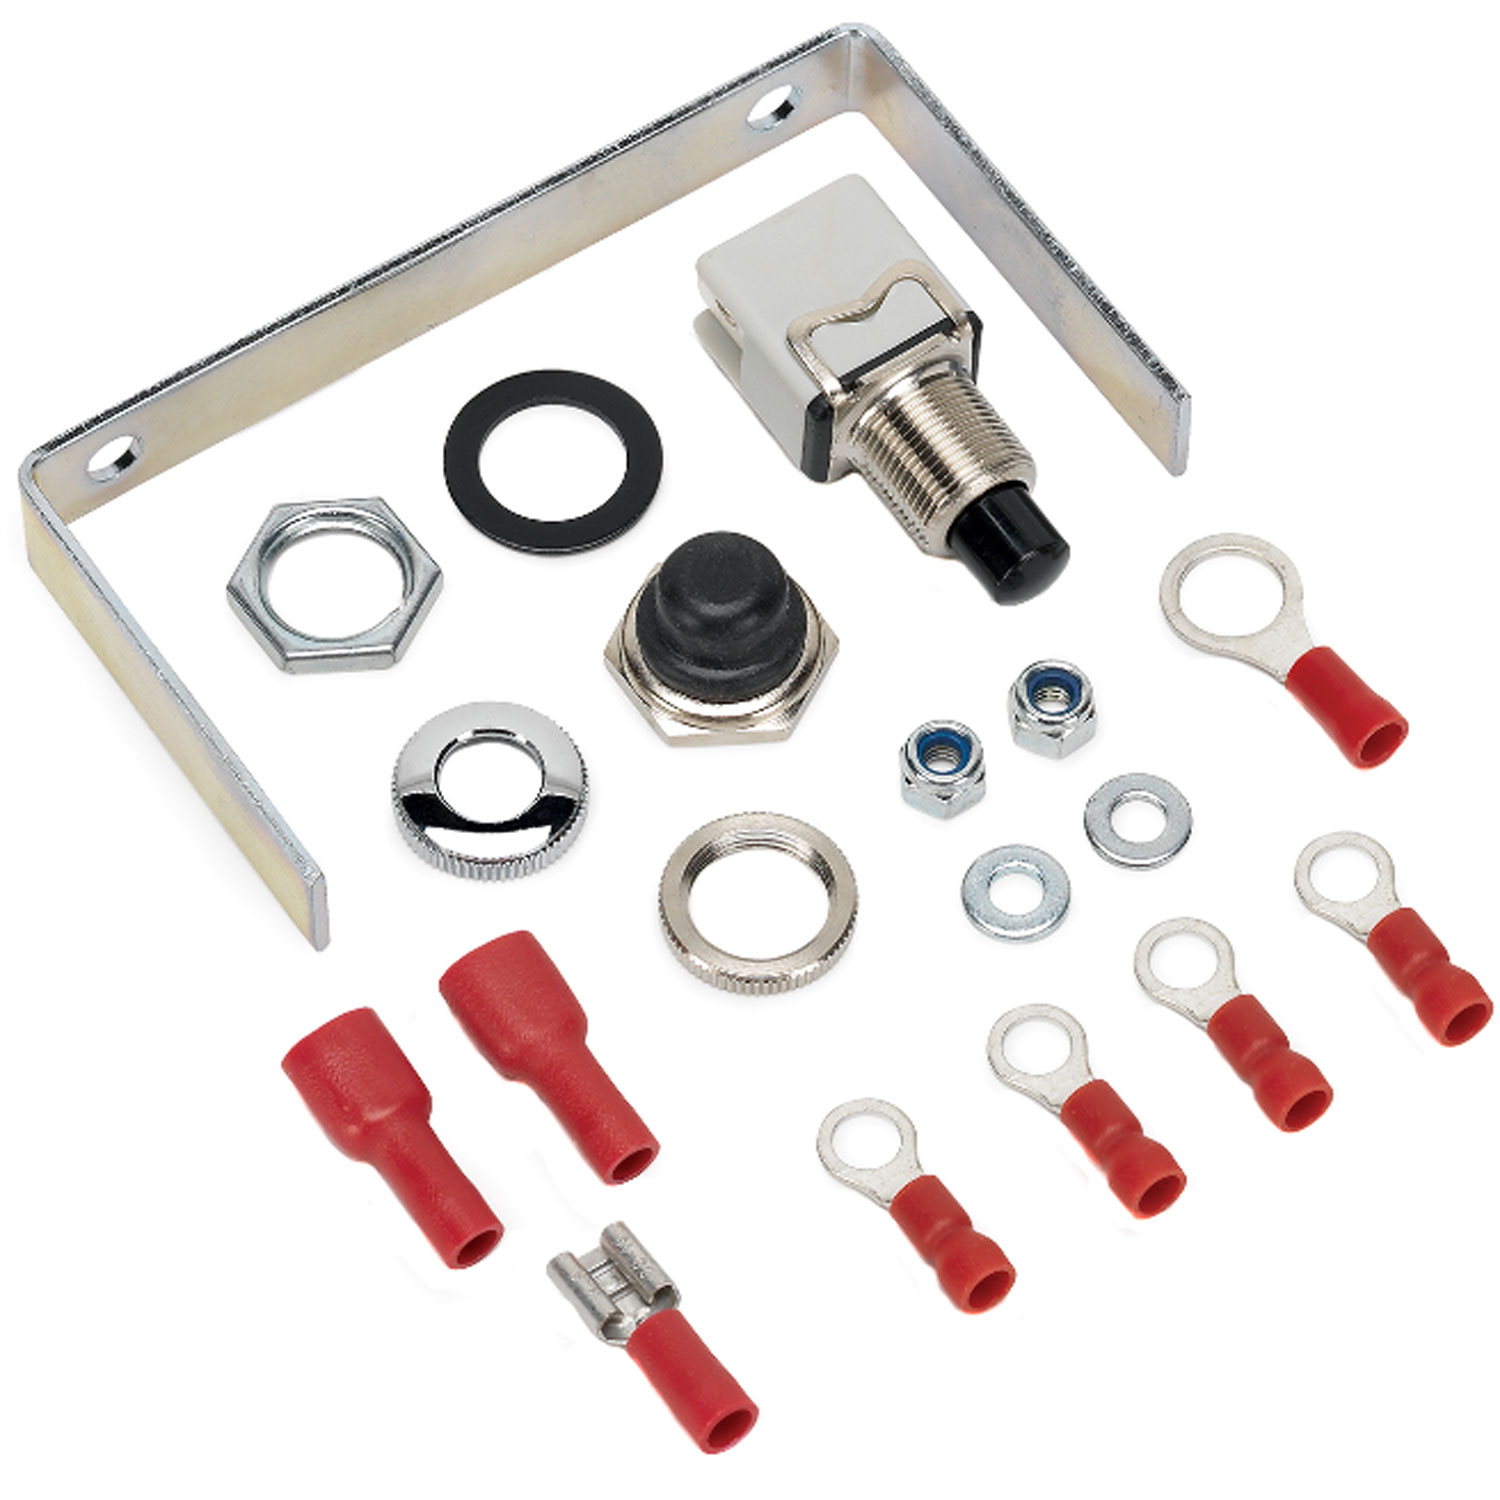 INSTALL KIT CLUBMAN TACH INCL. BRKT / HRDWRE SWITCH / CONNECTORS